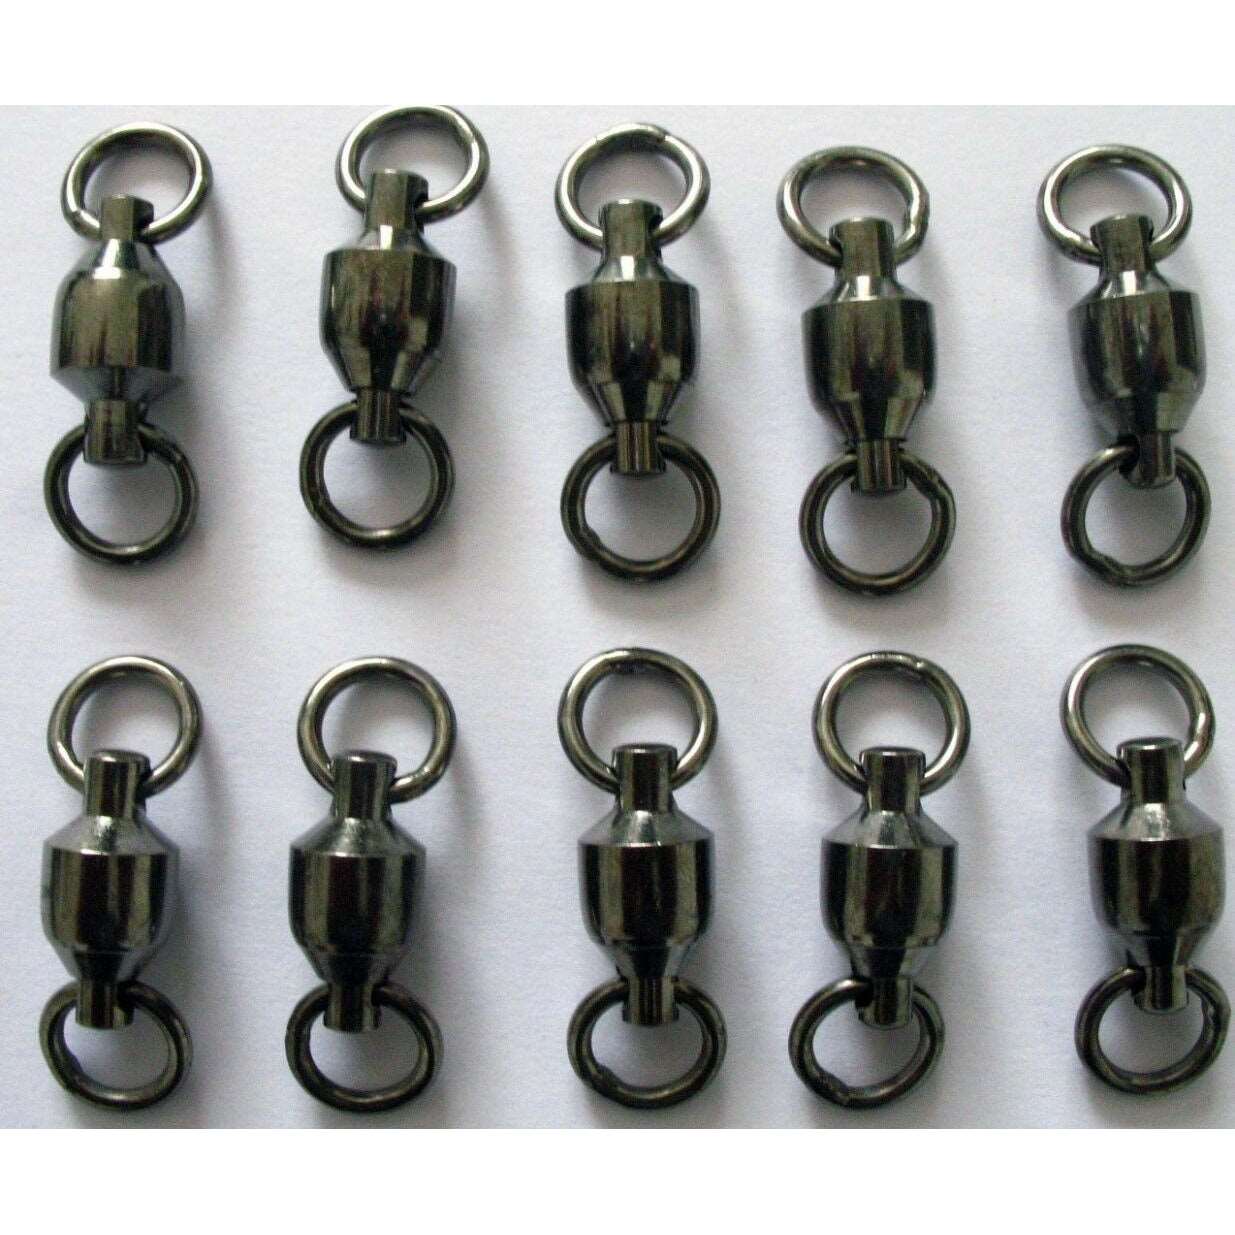 20 X Ball Bearing Swivels Size 3# For Game Need Fishing Tackle